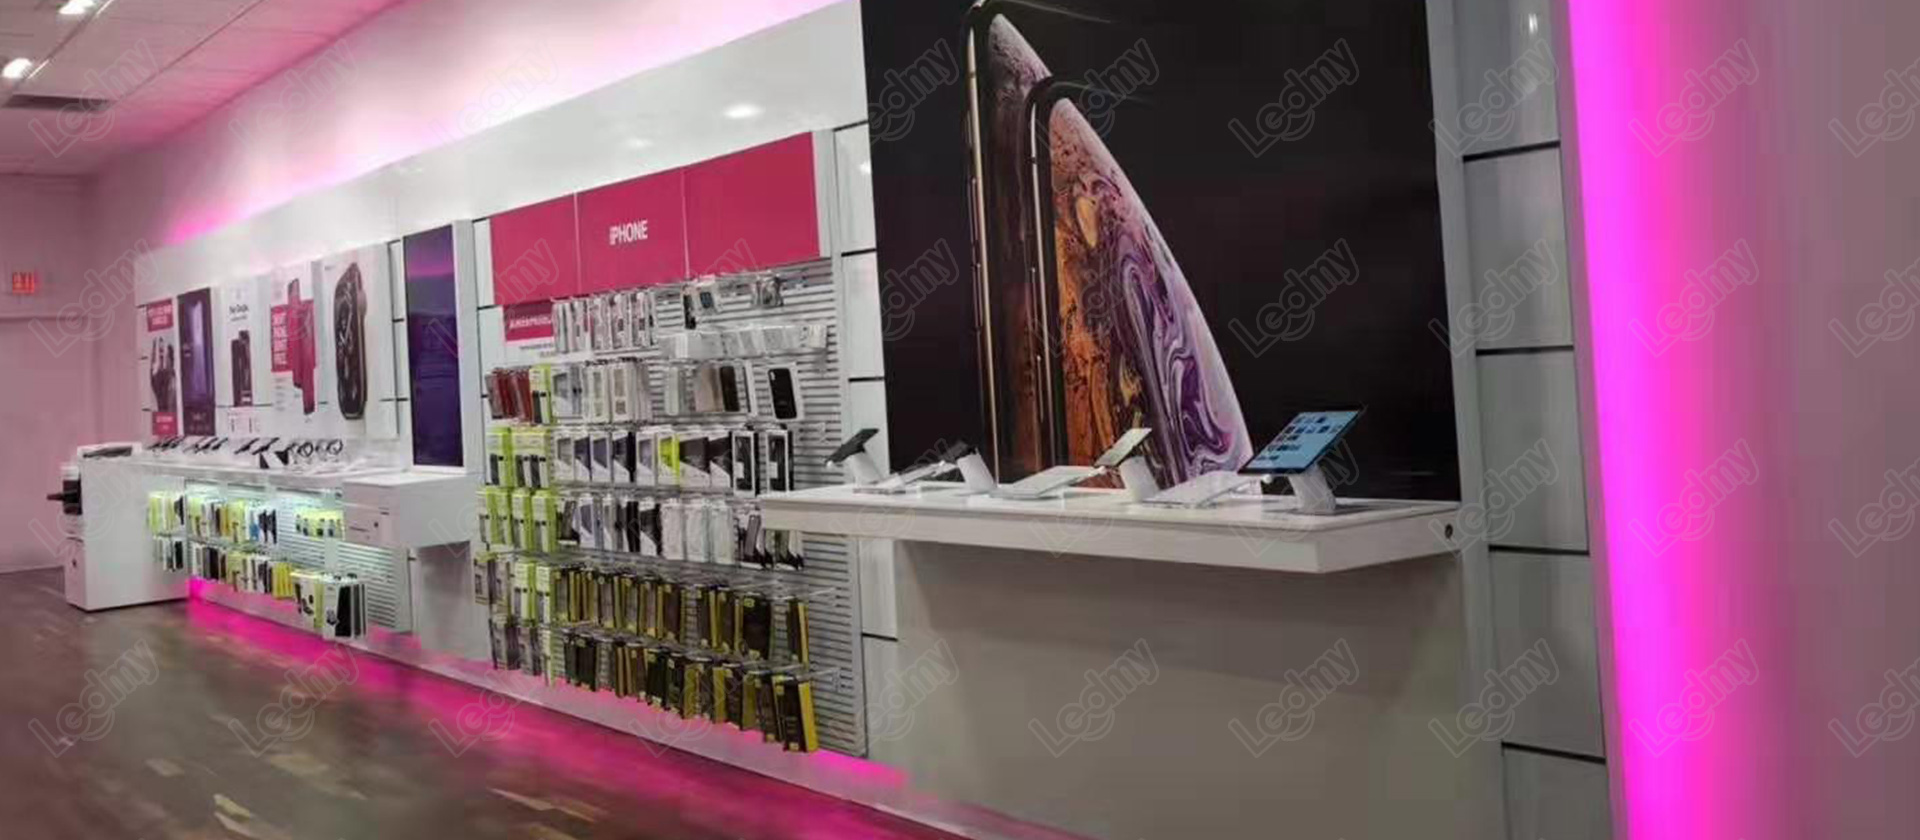 T-MOBILE 商店